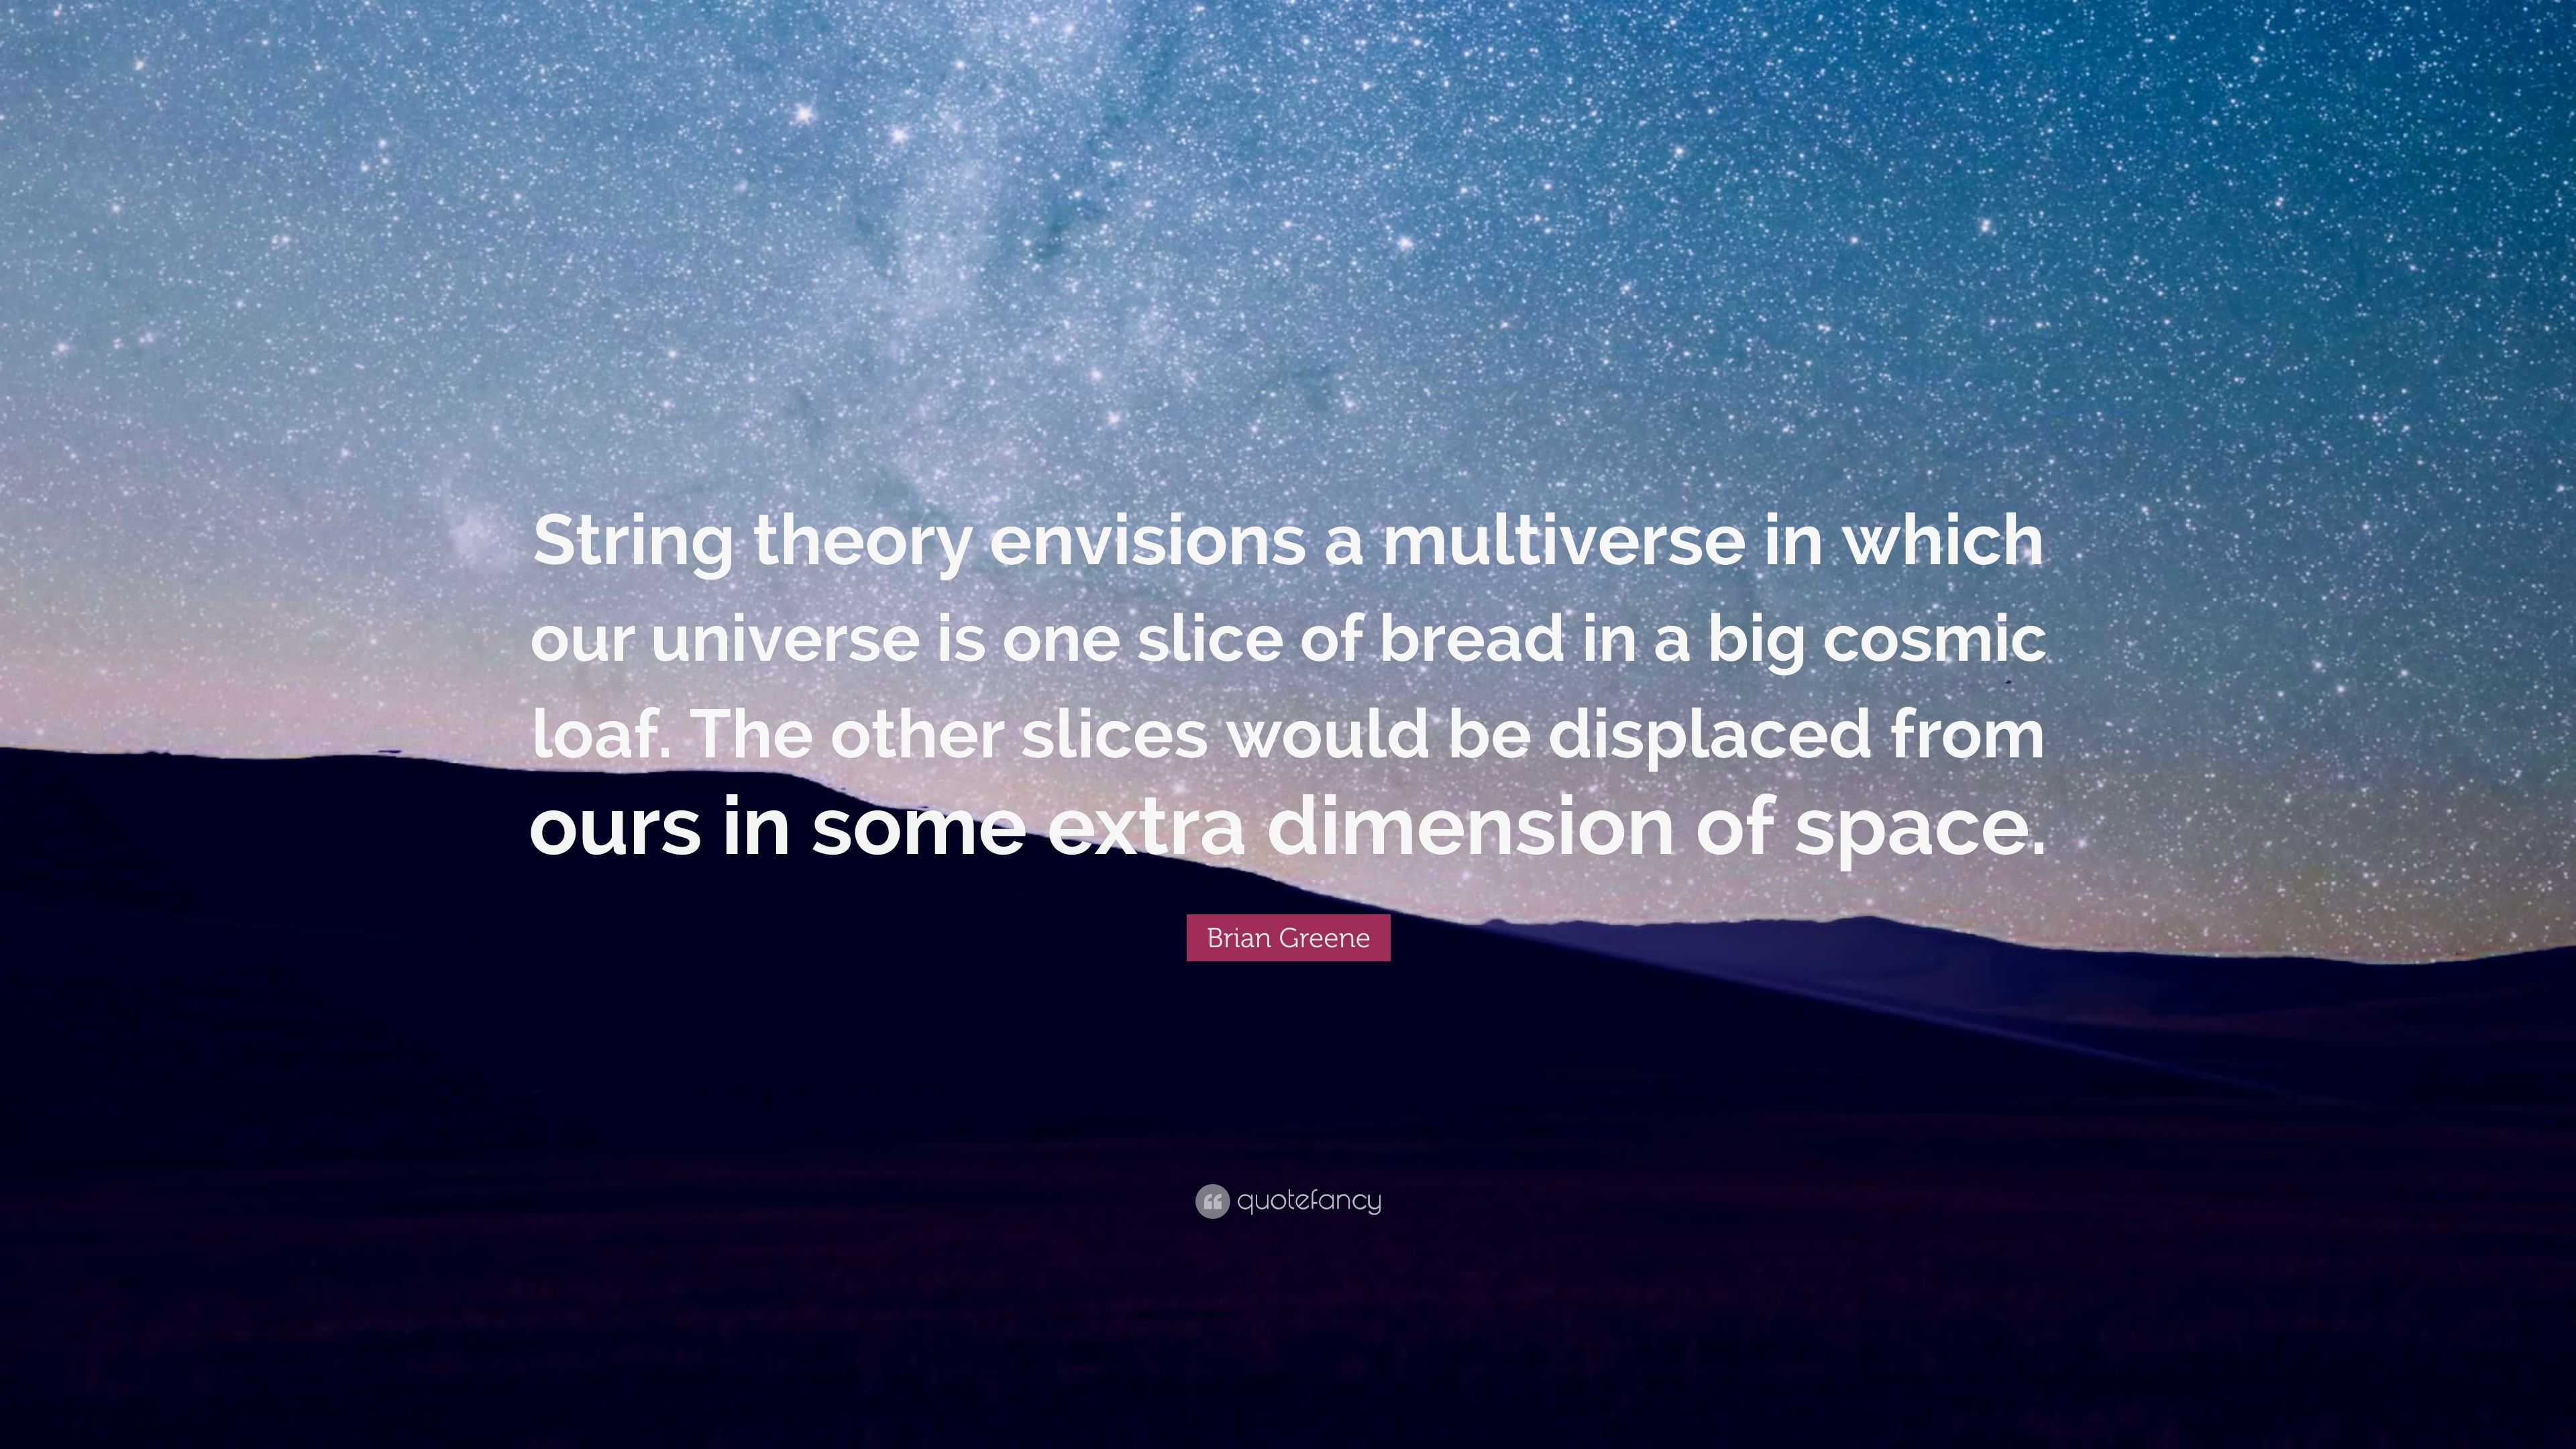 Brian Greene Quote: “String theory envisions a multiverse in which our universe is one slice of bread in a big cosmic loaf. The other slices .” (7 wallpaper)